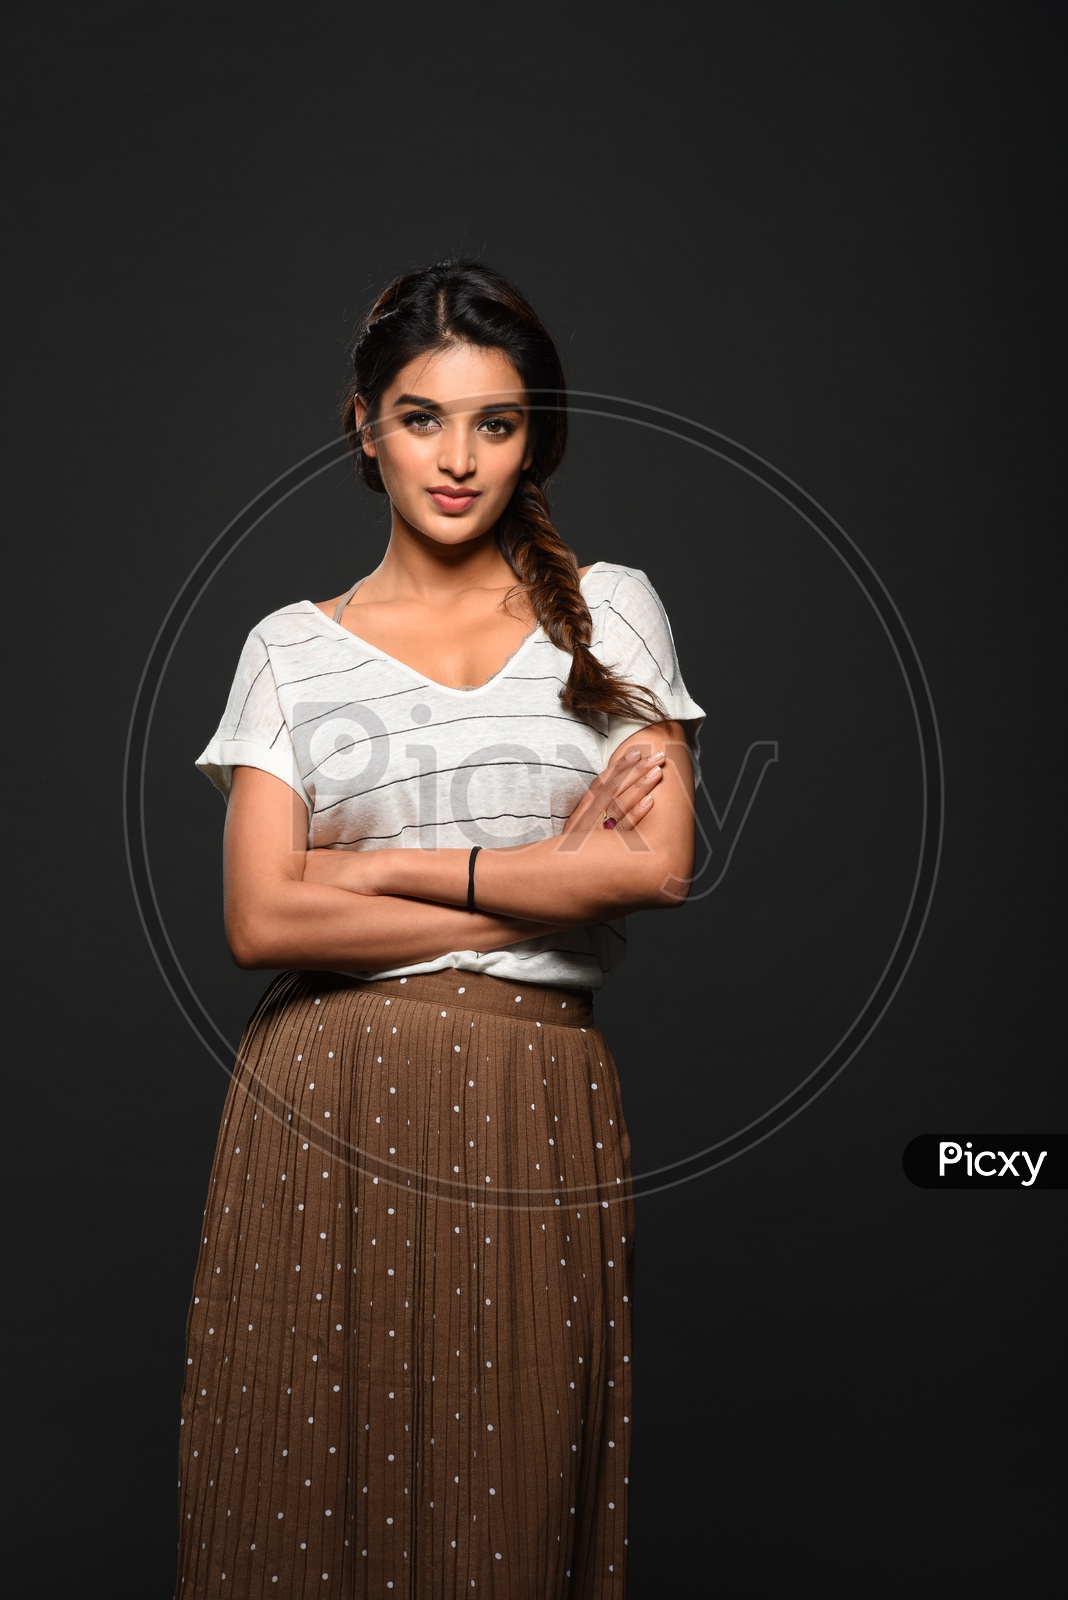 Nidhhi Agerwal, Indian Actress, Model And Dancer